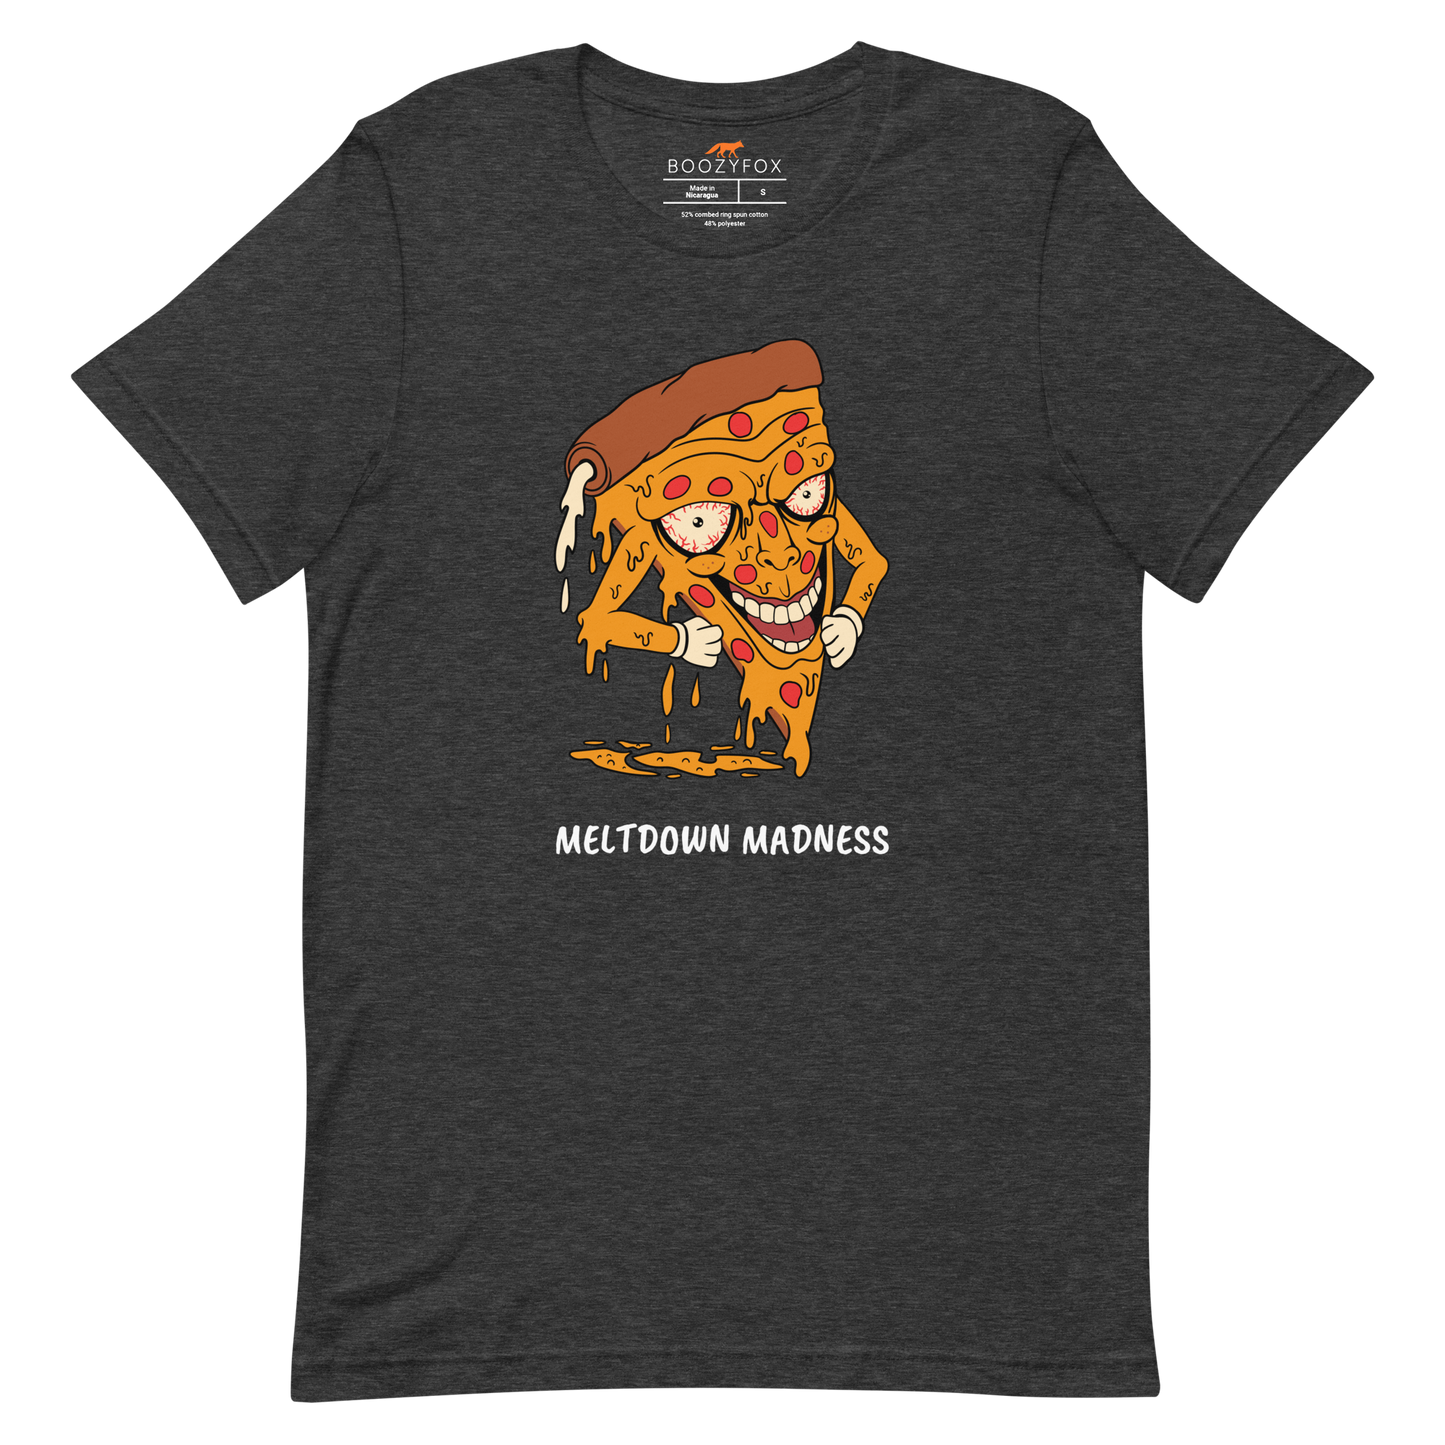 Dark grey Heather Premium Melting Pizza Tee featuring a Meltdown Madness graphic on the chest - Funny Graphic Pizza Tees - Boozy Fox